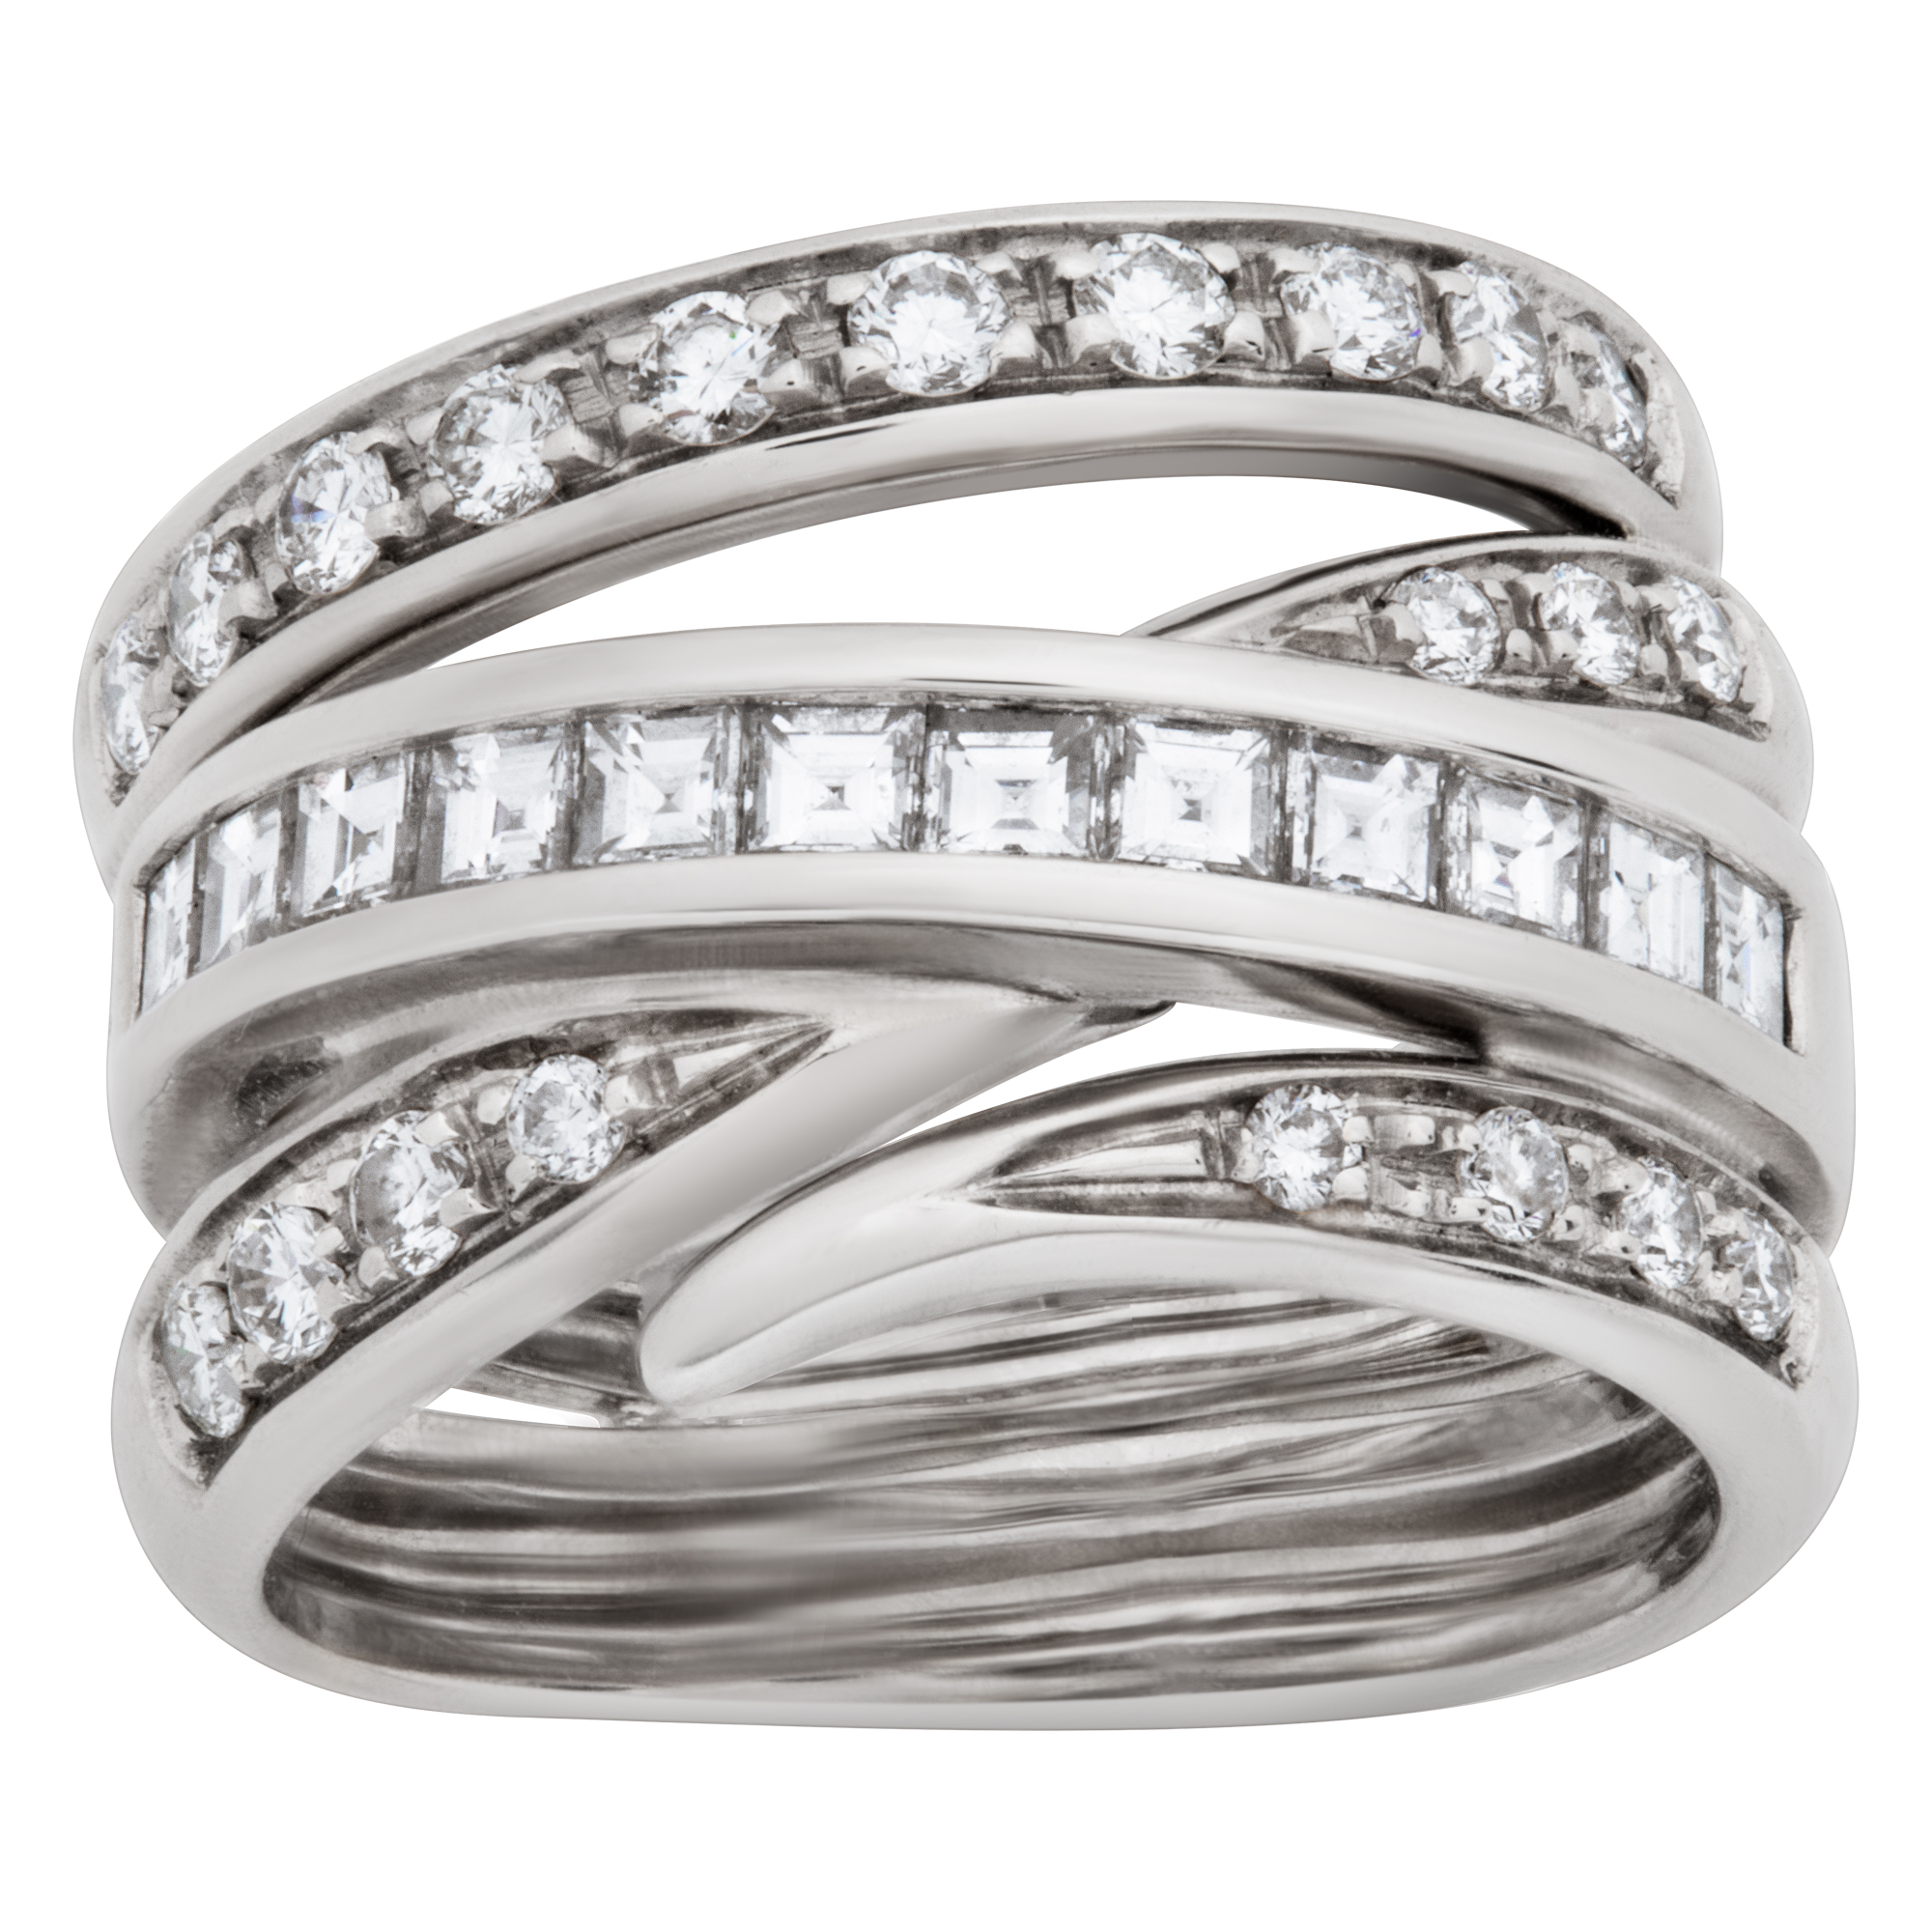 Crossover diamond ring in 18k white gold. 2.10 carats in diamonds. Size 6.5 image 1